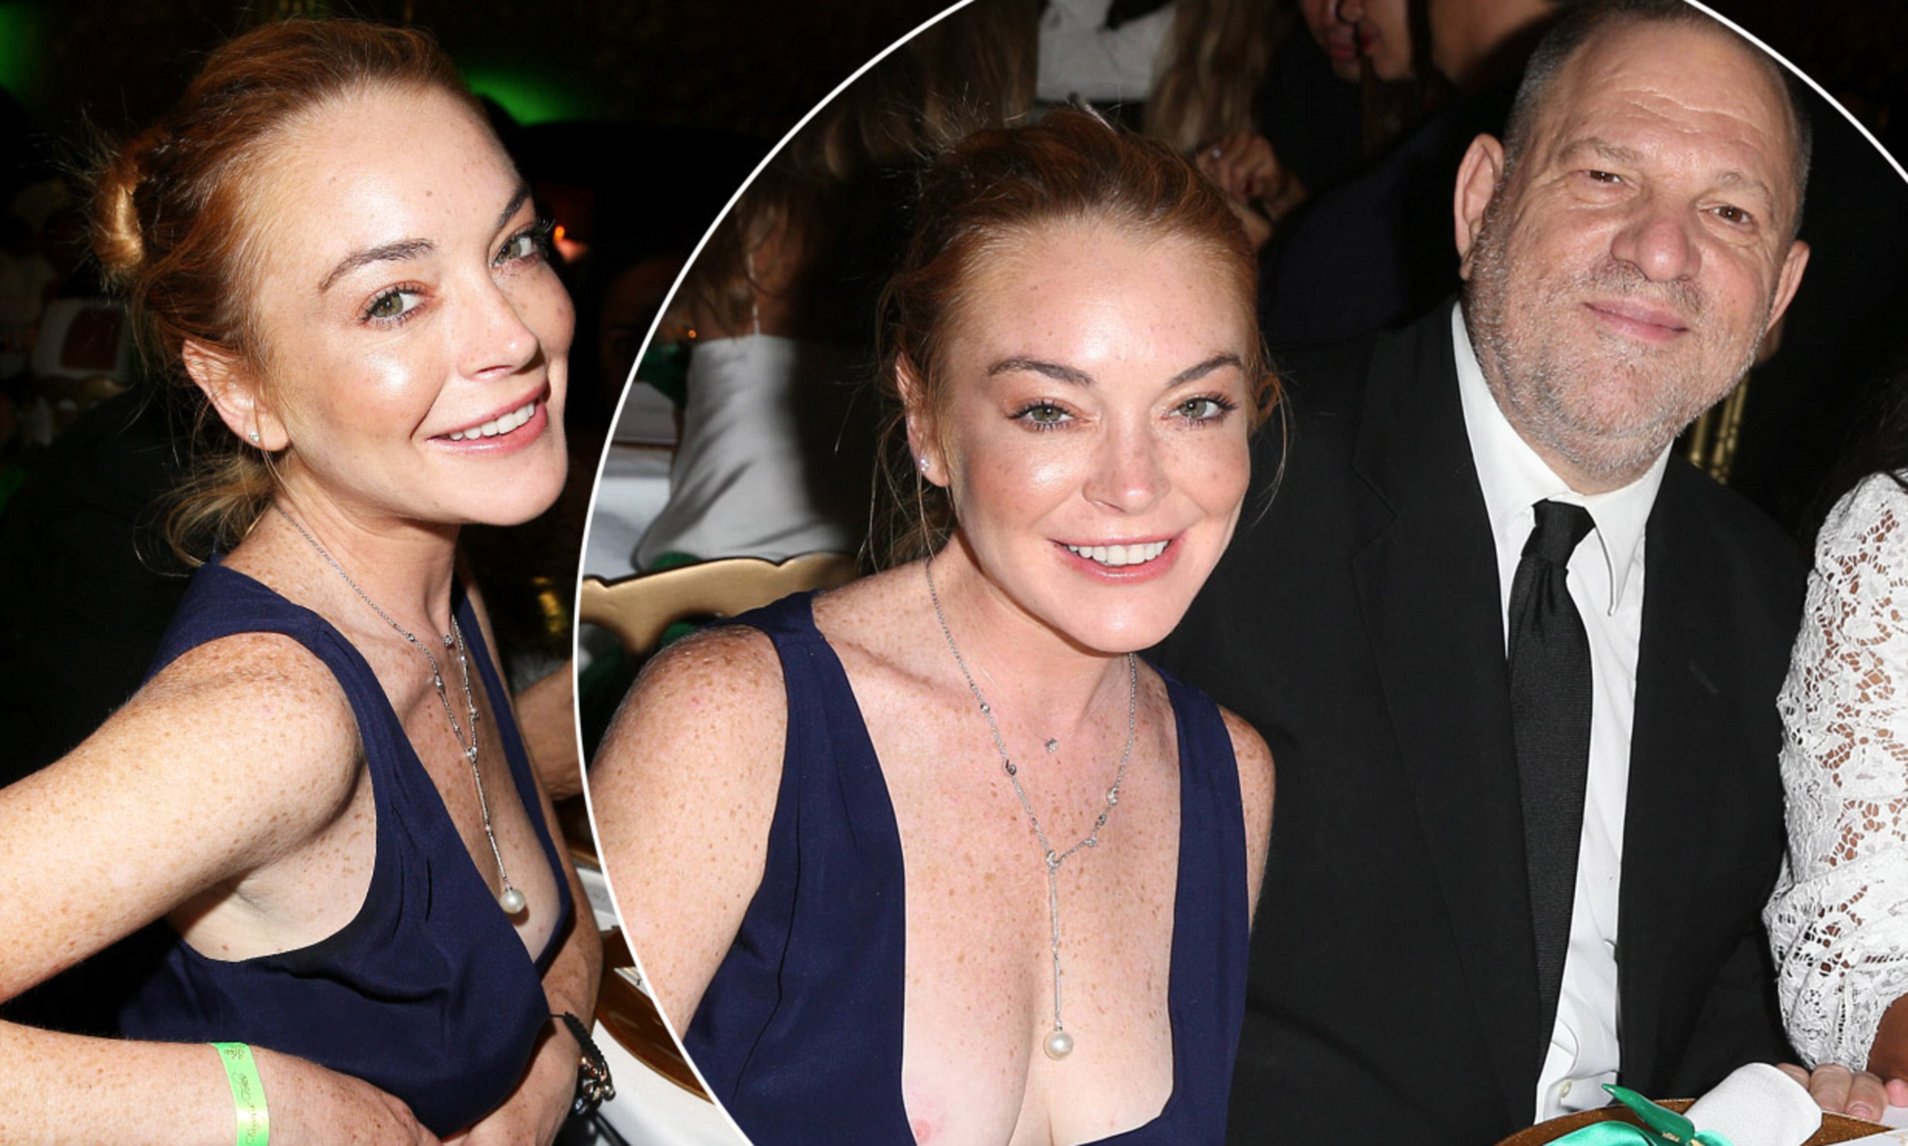 Lindsay Lohan Suffers Embarrassing Wardrobe Malfunction And Exposes Modesty For All To See 5170